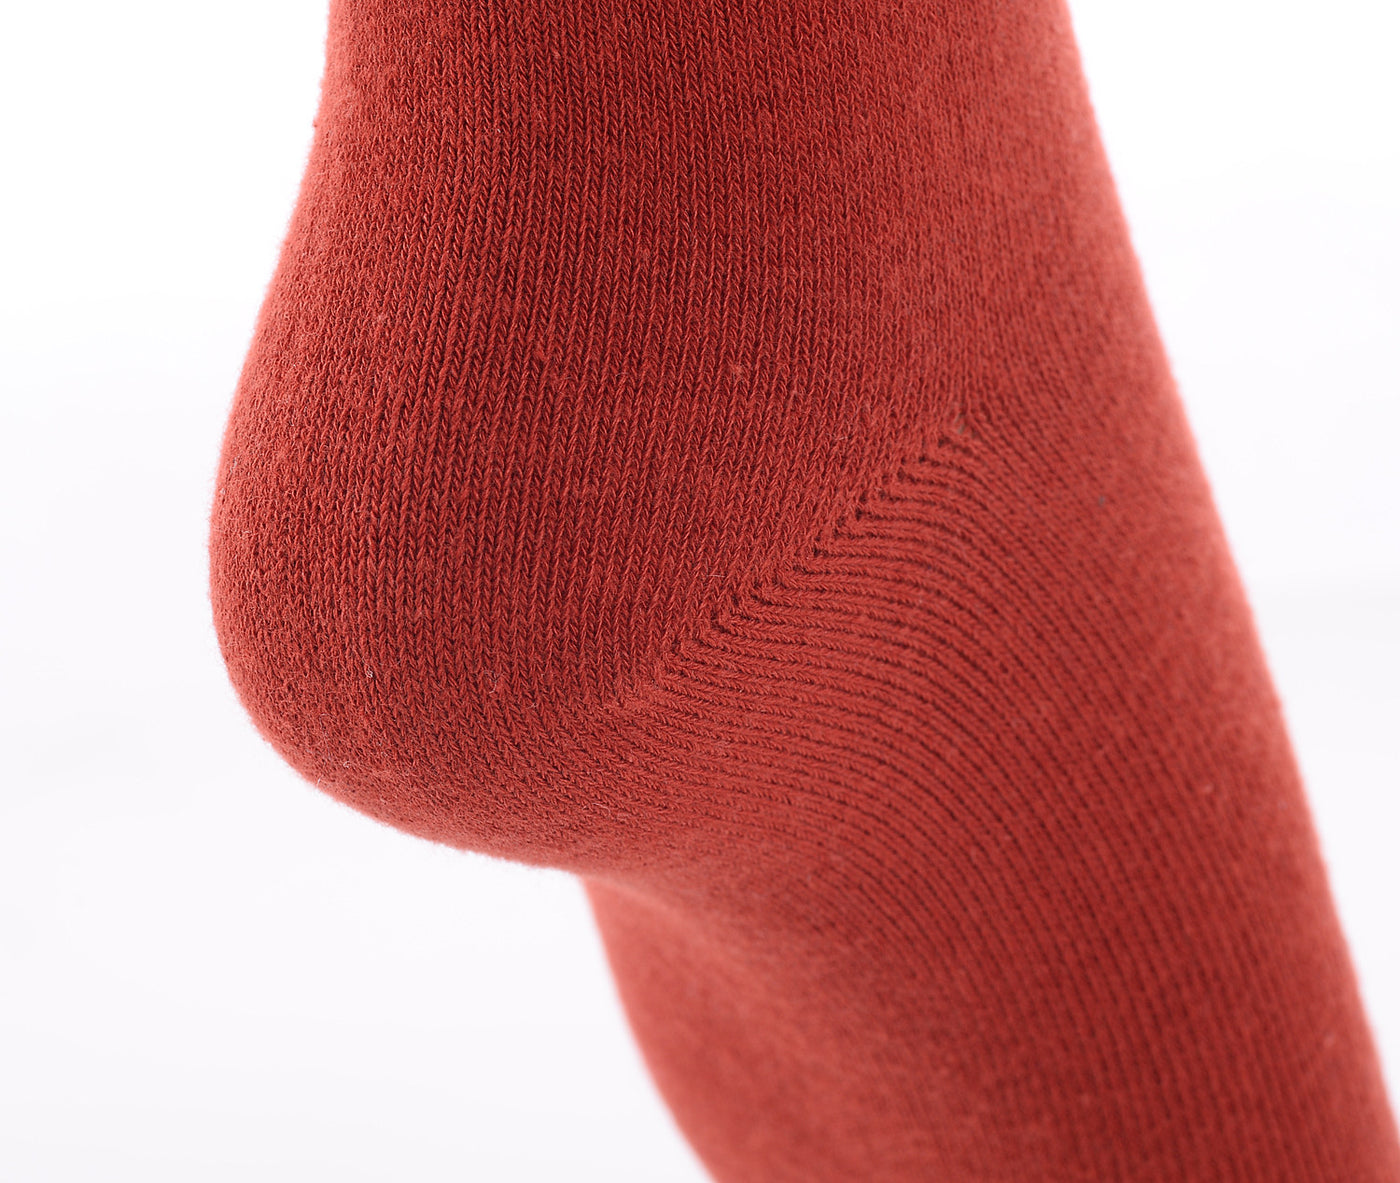 Finest Combed Cotton Knee High Socks - Plain Red